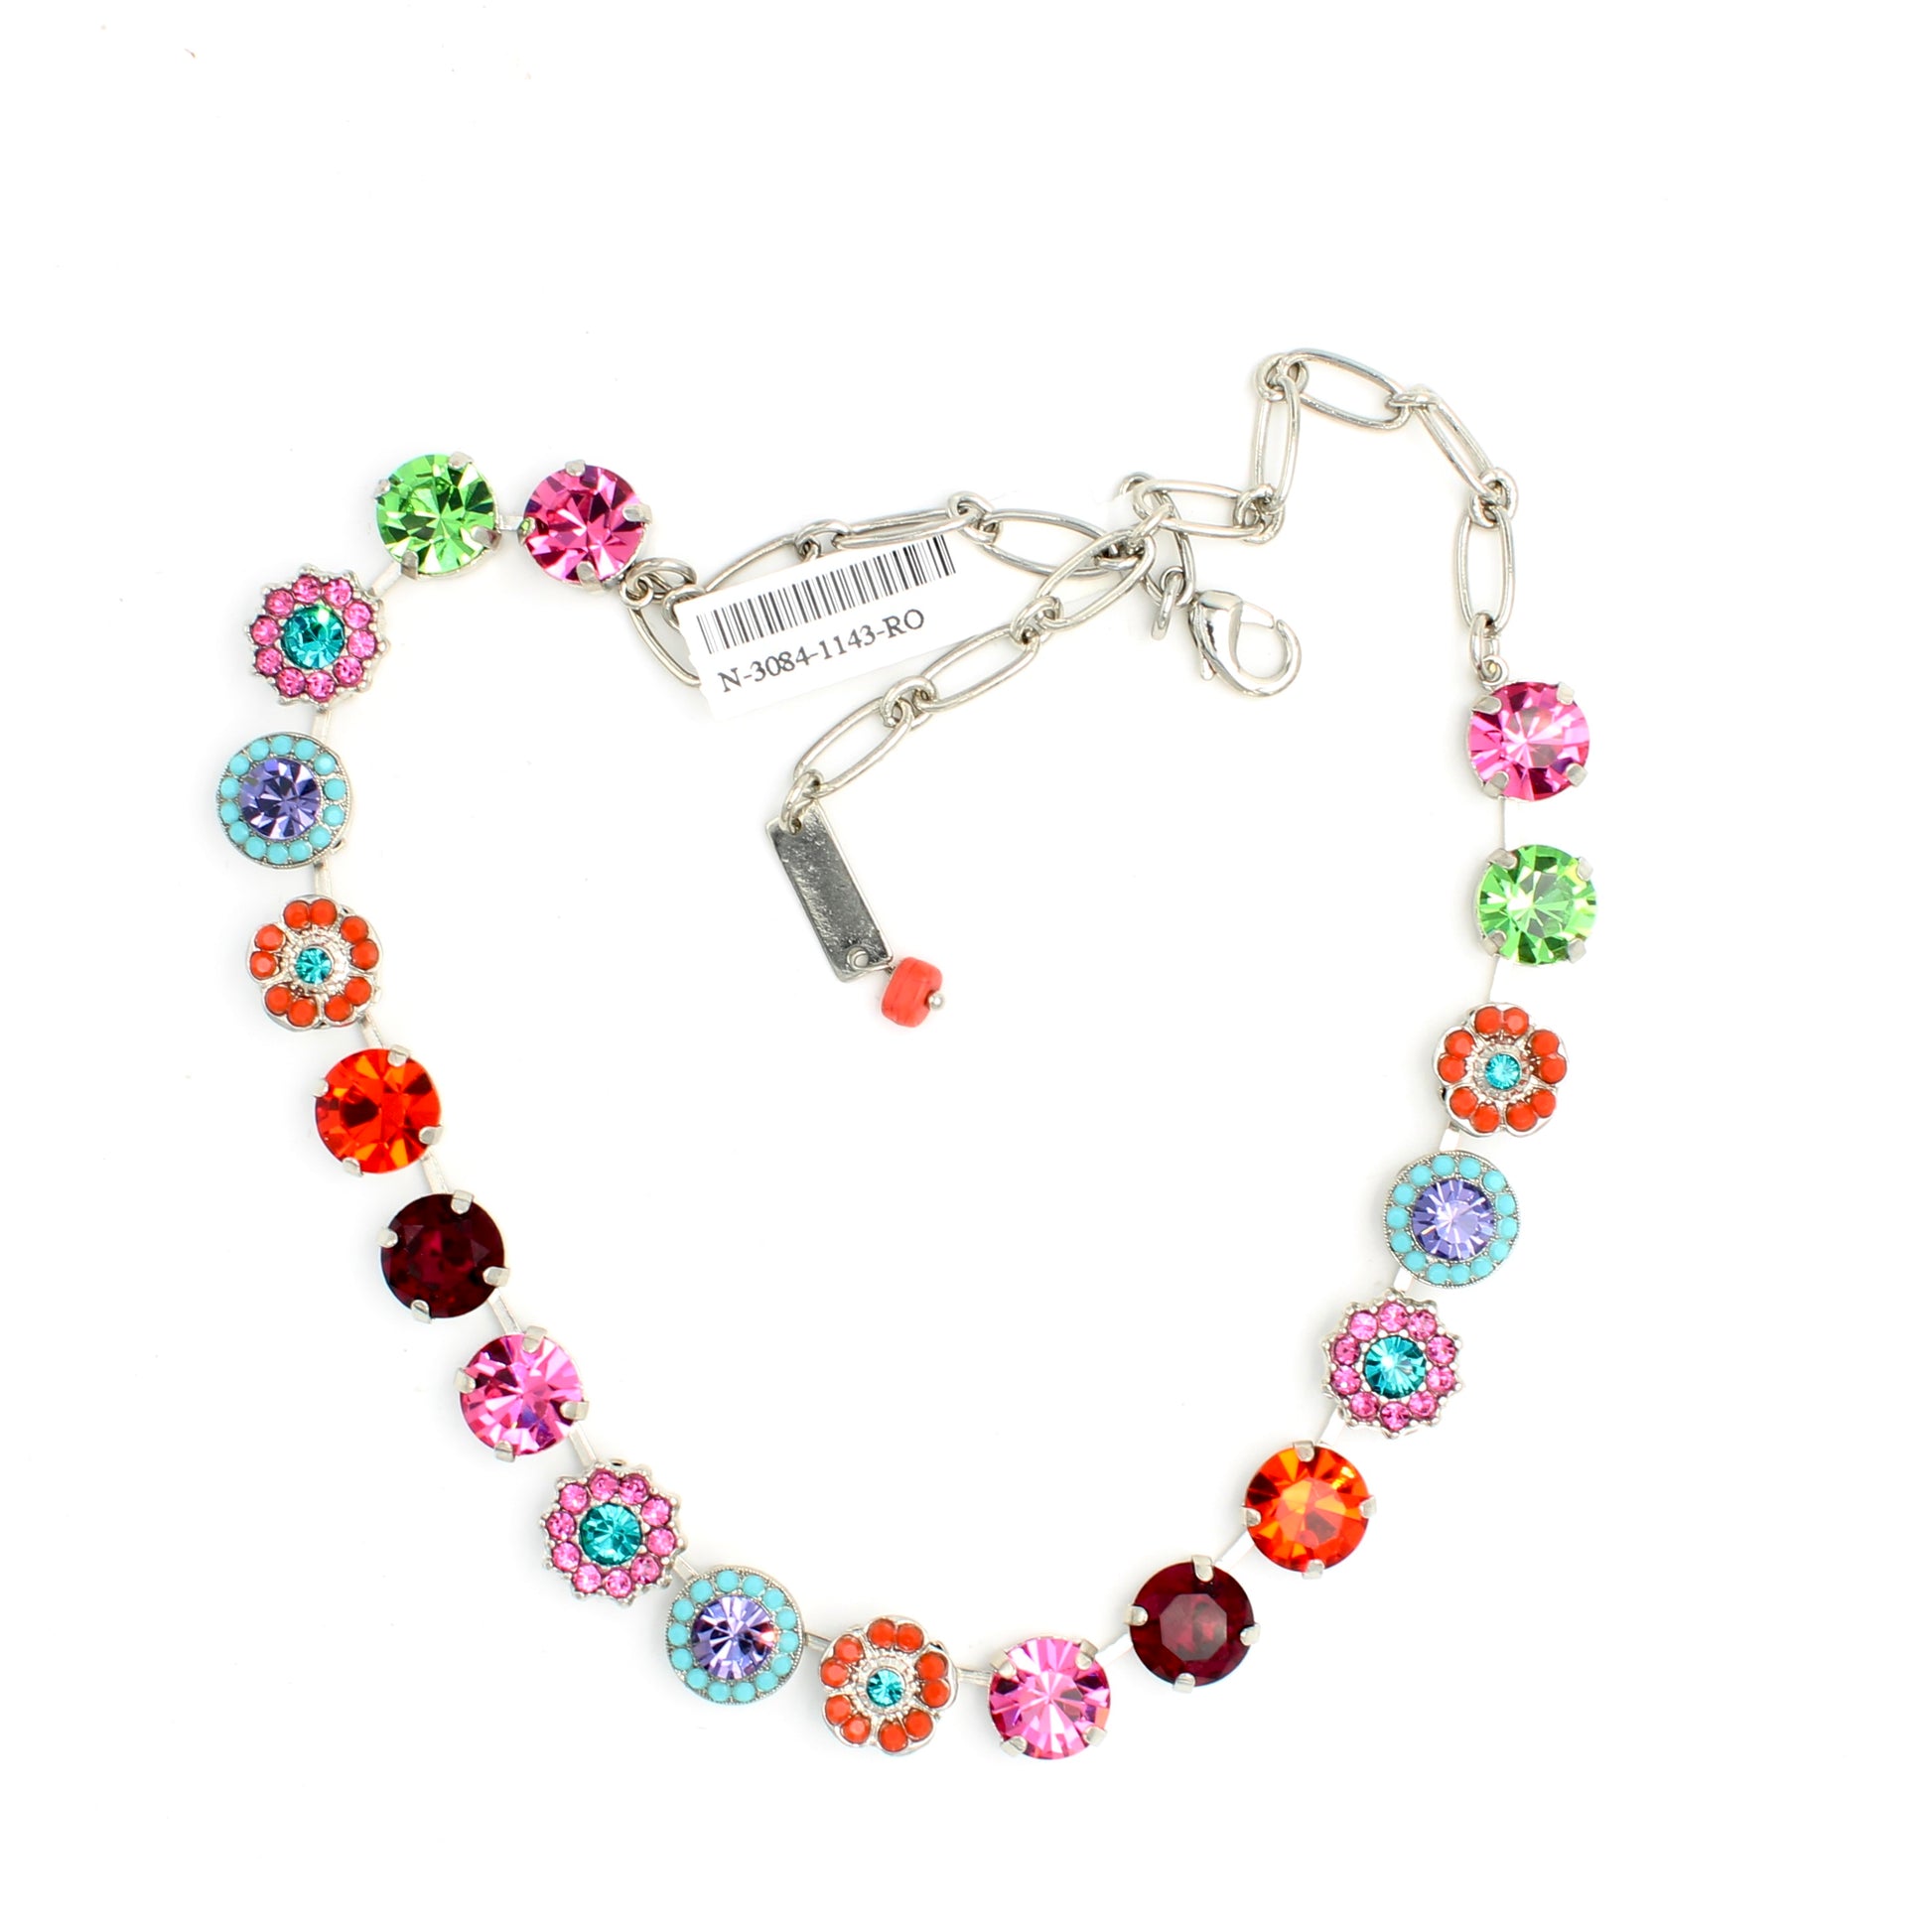 Rainbow Sherbet Lovable Mixed Element Necklace - MaryTyke's